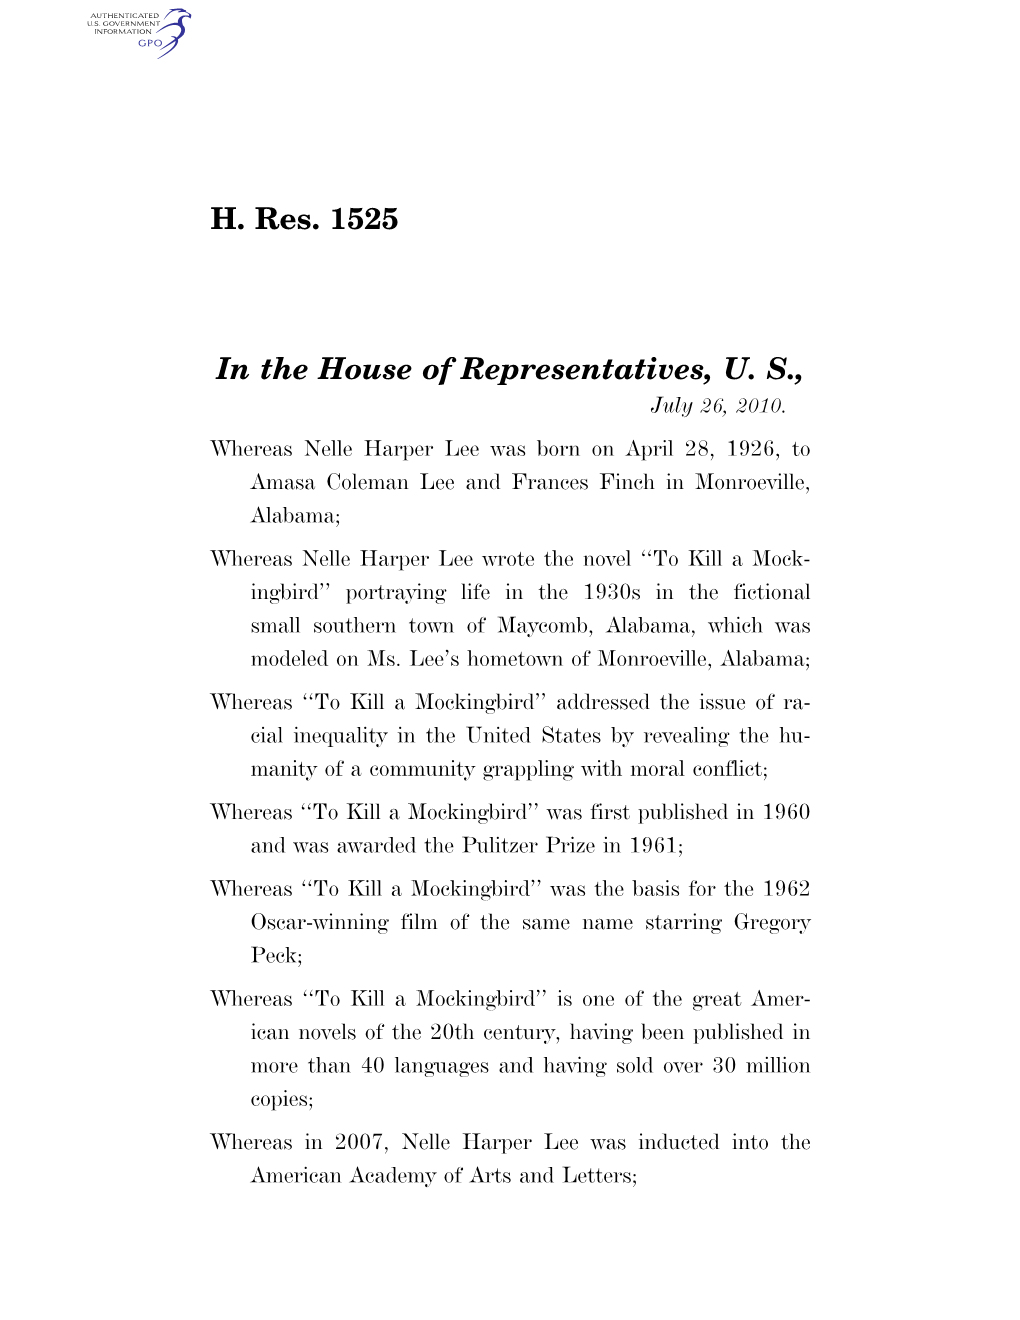 H. Res. 1525 in the House of Representatives